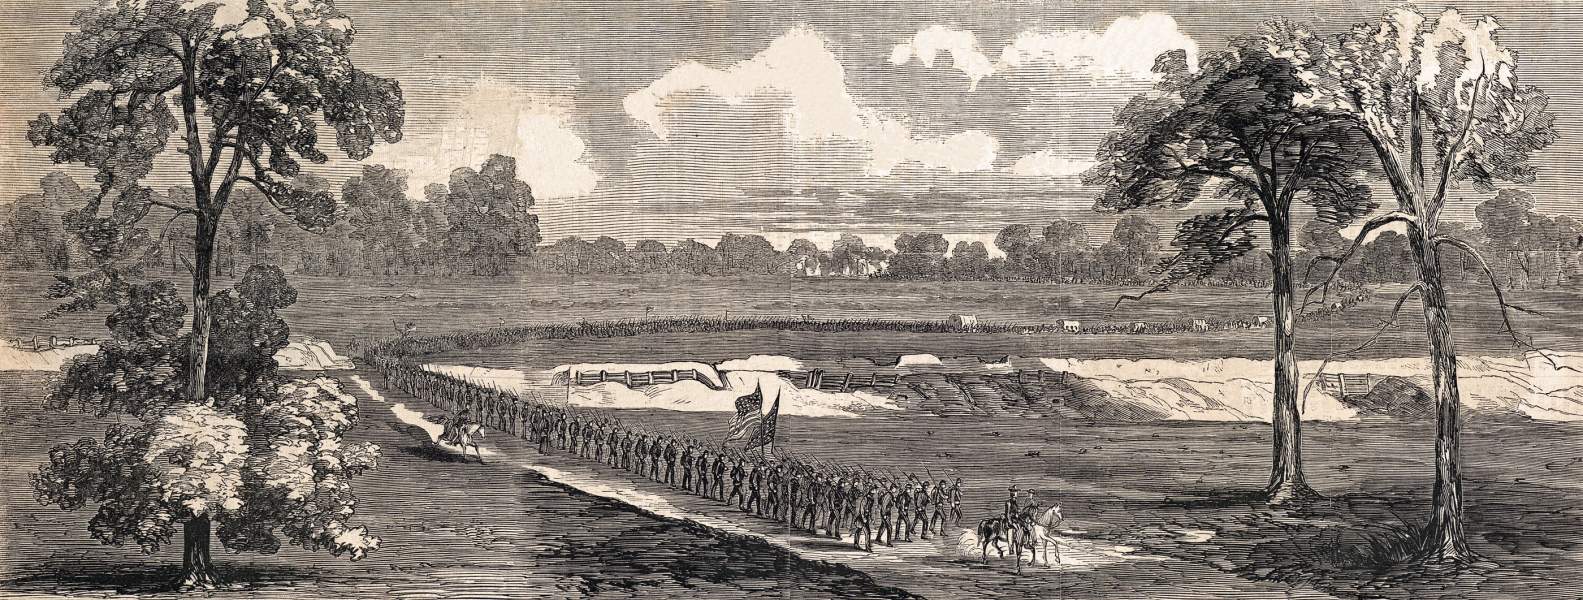 Union troops entering Port Hudson, July 9, 1863, artist's impression, zoomable image